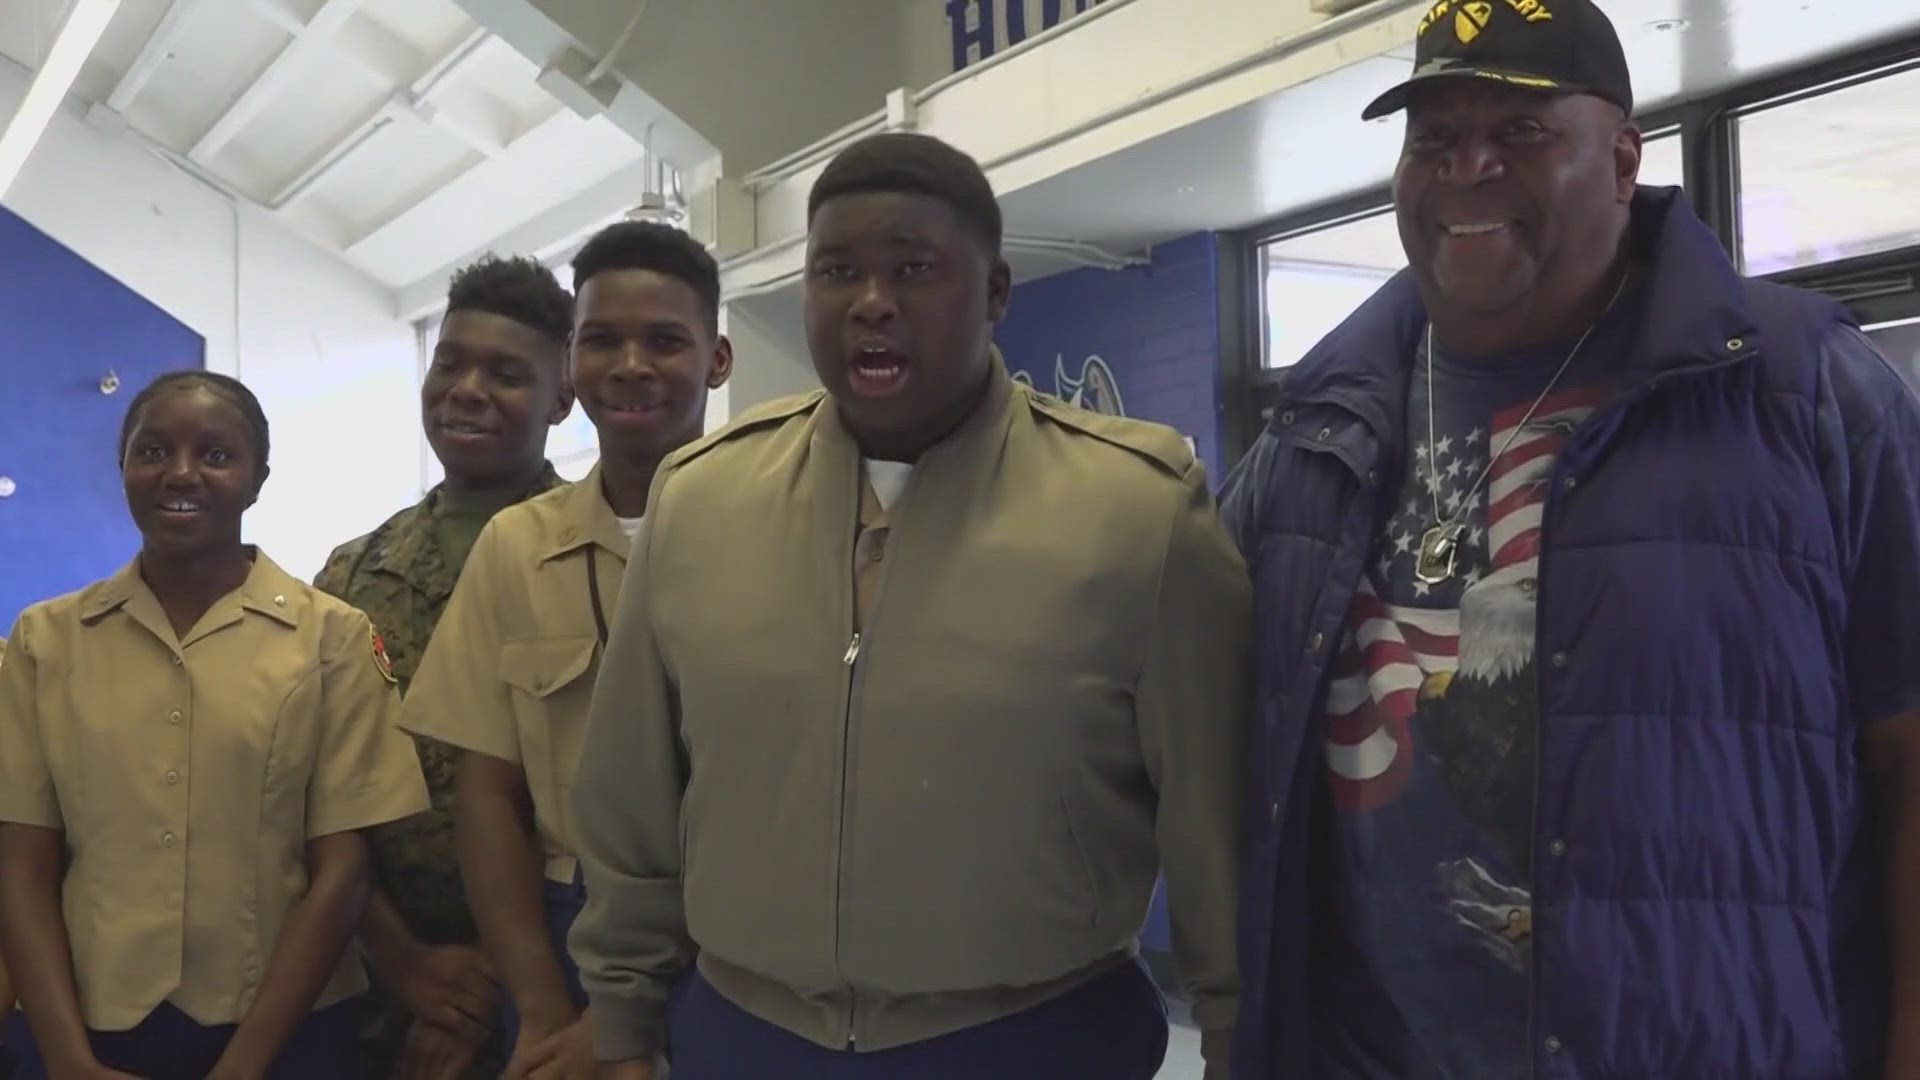 Students at Ribault High School in Jacksonville got the chance to meet some of their local Vietnam veterans.